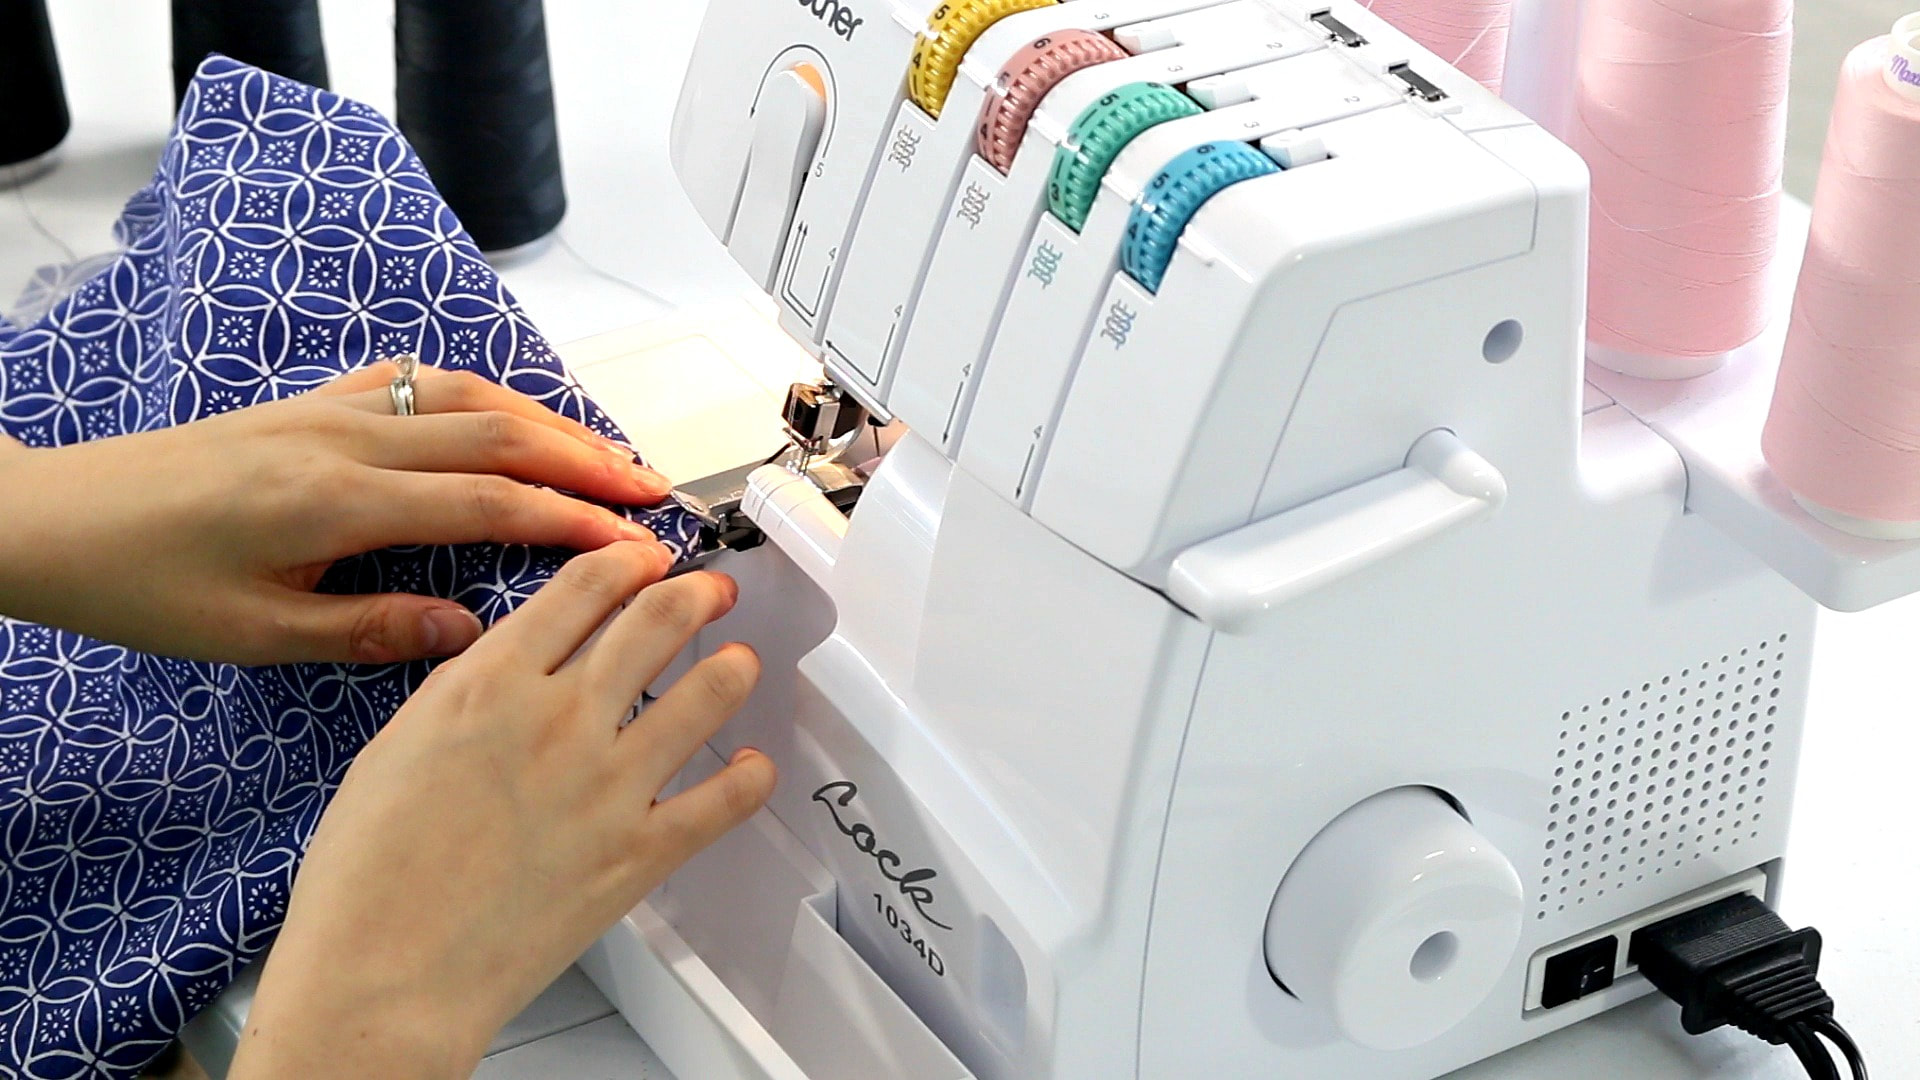 Online Class: Serger Techniques with SINGER